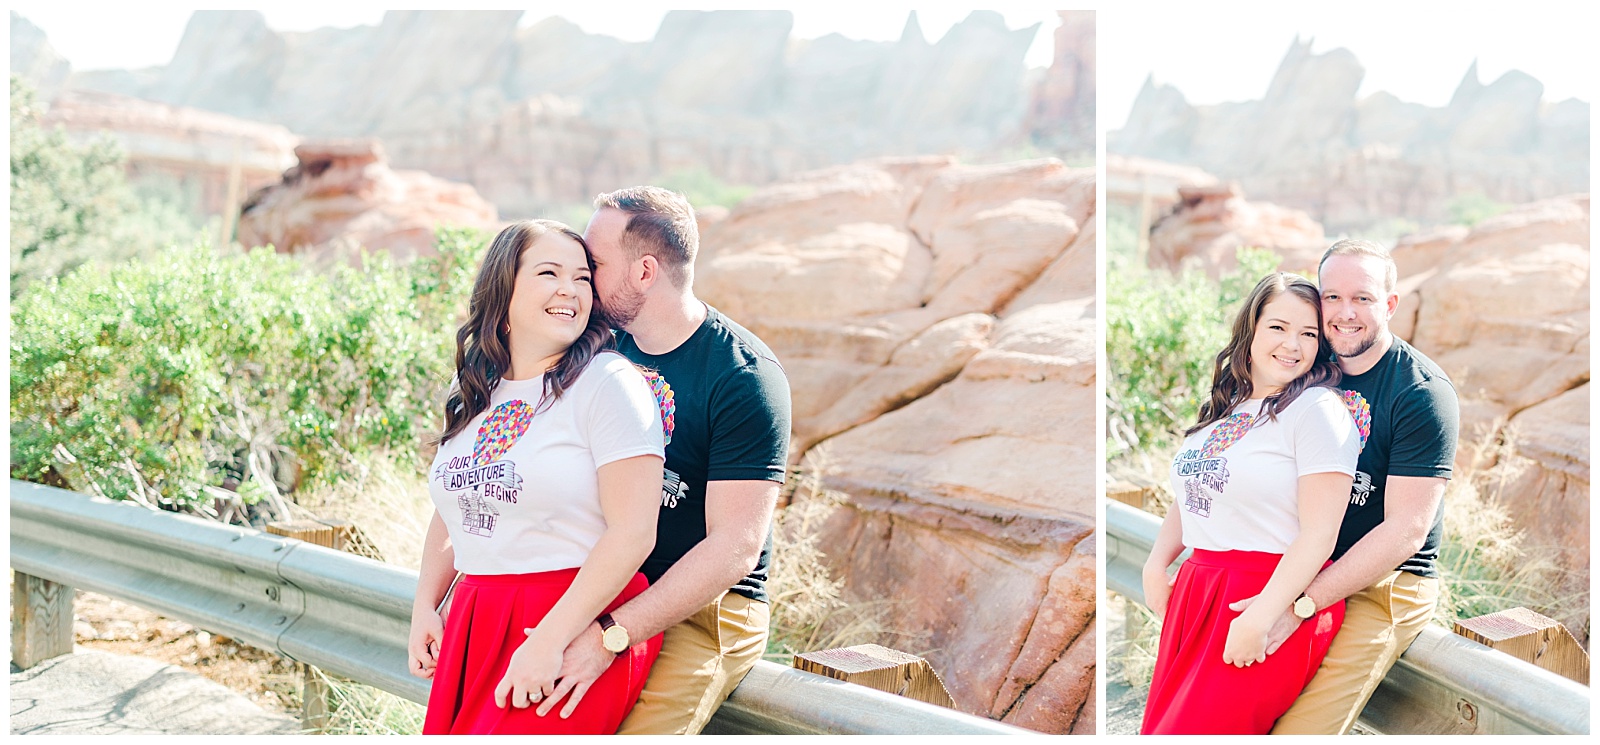 Disneyland Engagement Session.  Photographed by Mollie Jane Photography.  To see more of this session go to www.molliejanephotography.com